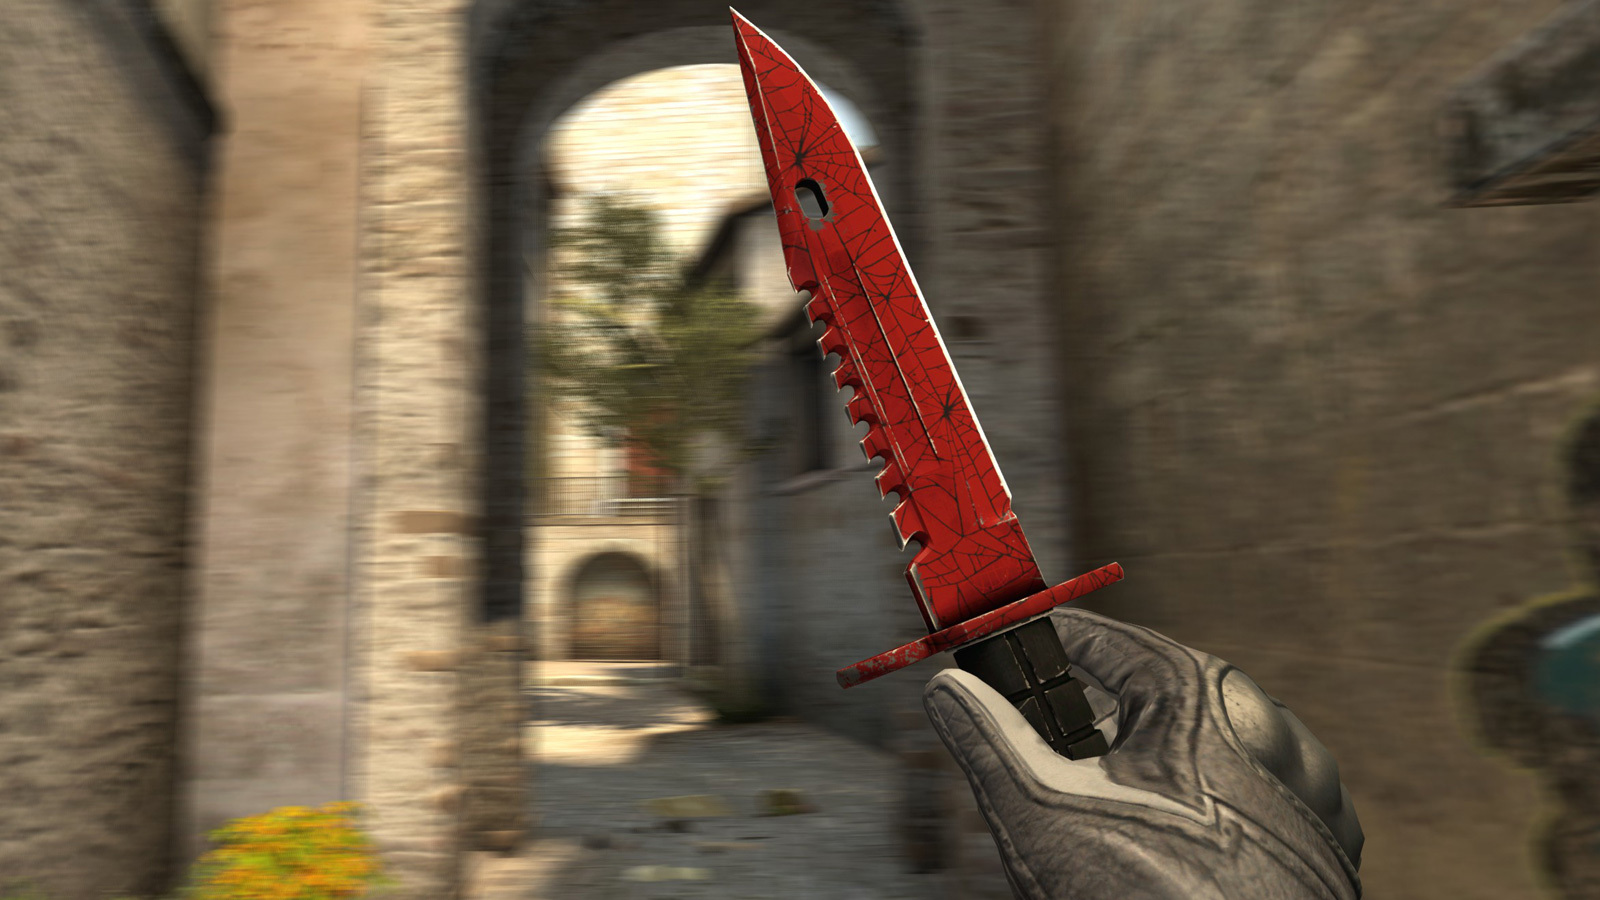 A Counter-Strike 2 player was stunned when a knife somehow caught fire